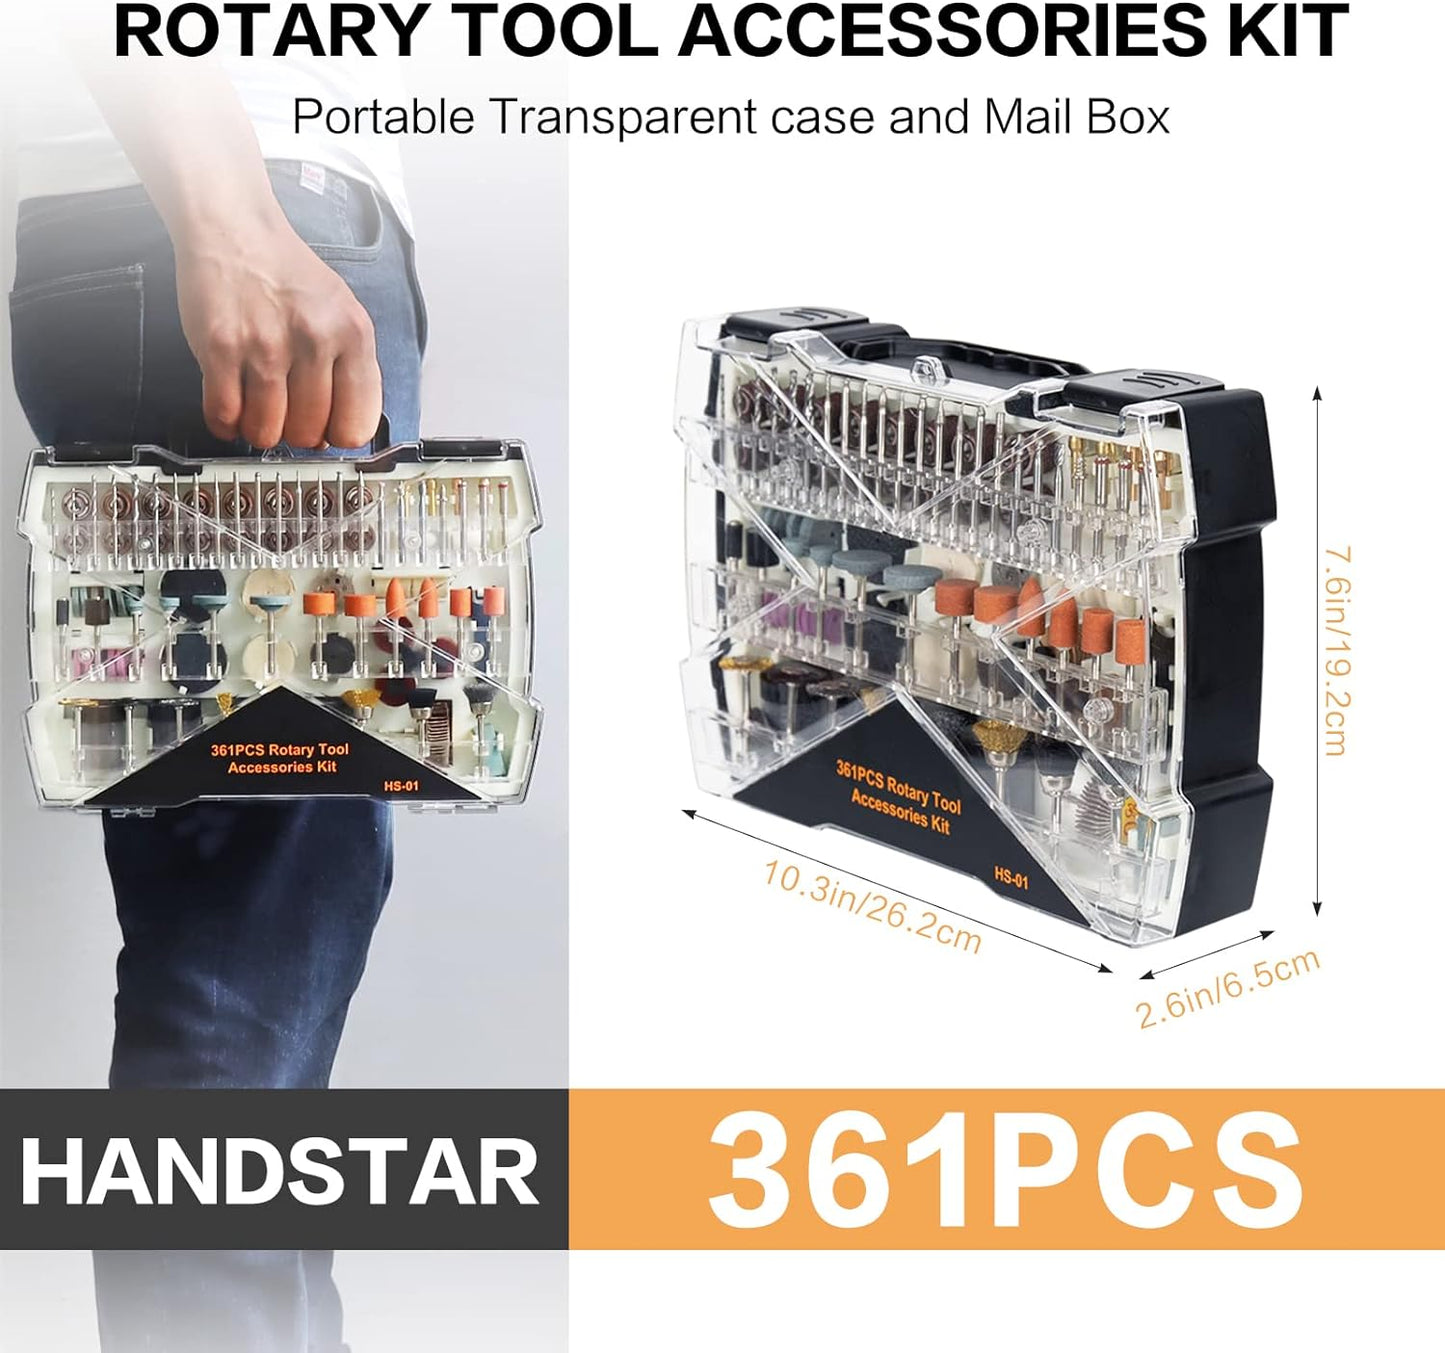 361pcs Rotary Tool Accessories Kit, 1/8”(3.2mm) Diameter Shanks, Universal Fitment Case Included